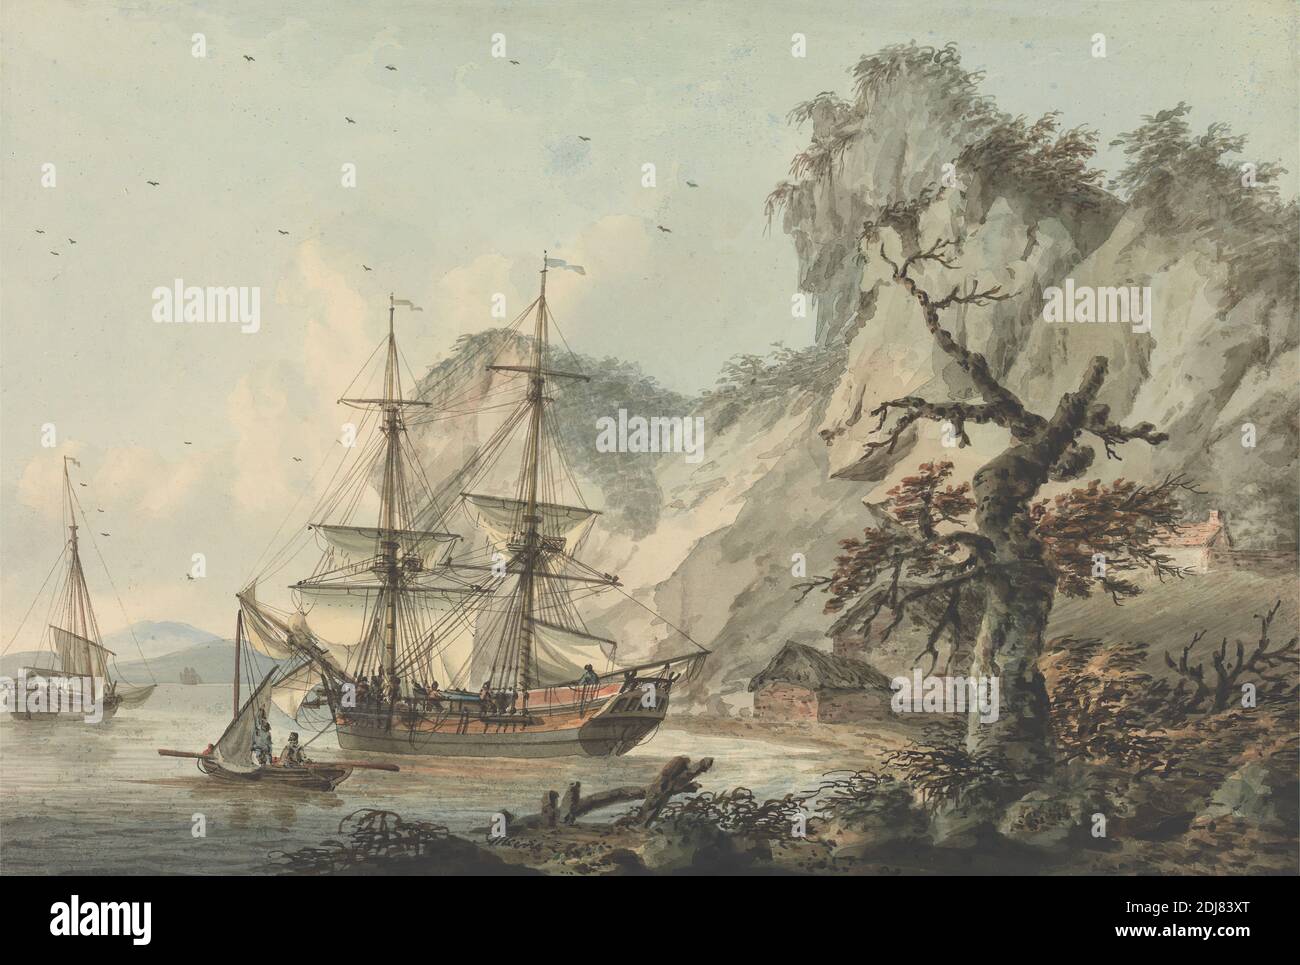 Merchant Ship off Shore, Samuel Atkins, active 1787–1808, British, active in the East Indies (1796–1804), undated, Watercolor, pen and brown ink, and graphite on medium, slightly textured, cream wove paper, Sheet: 8 × 11 7/8 inches (20.3 × 30.2 cm), landscape, marine art, merchants, sail, ships, shoreline Stock Photo